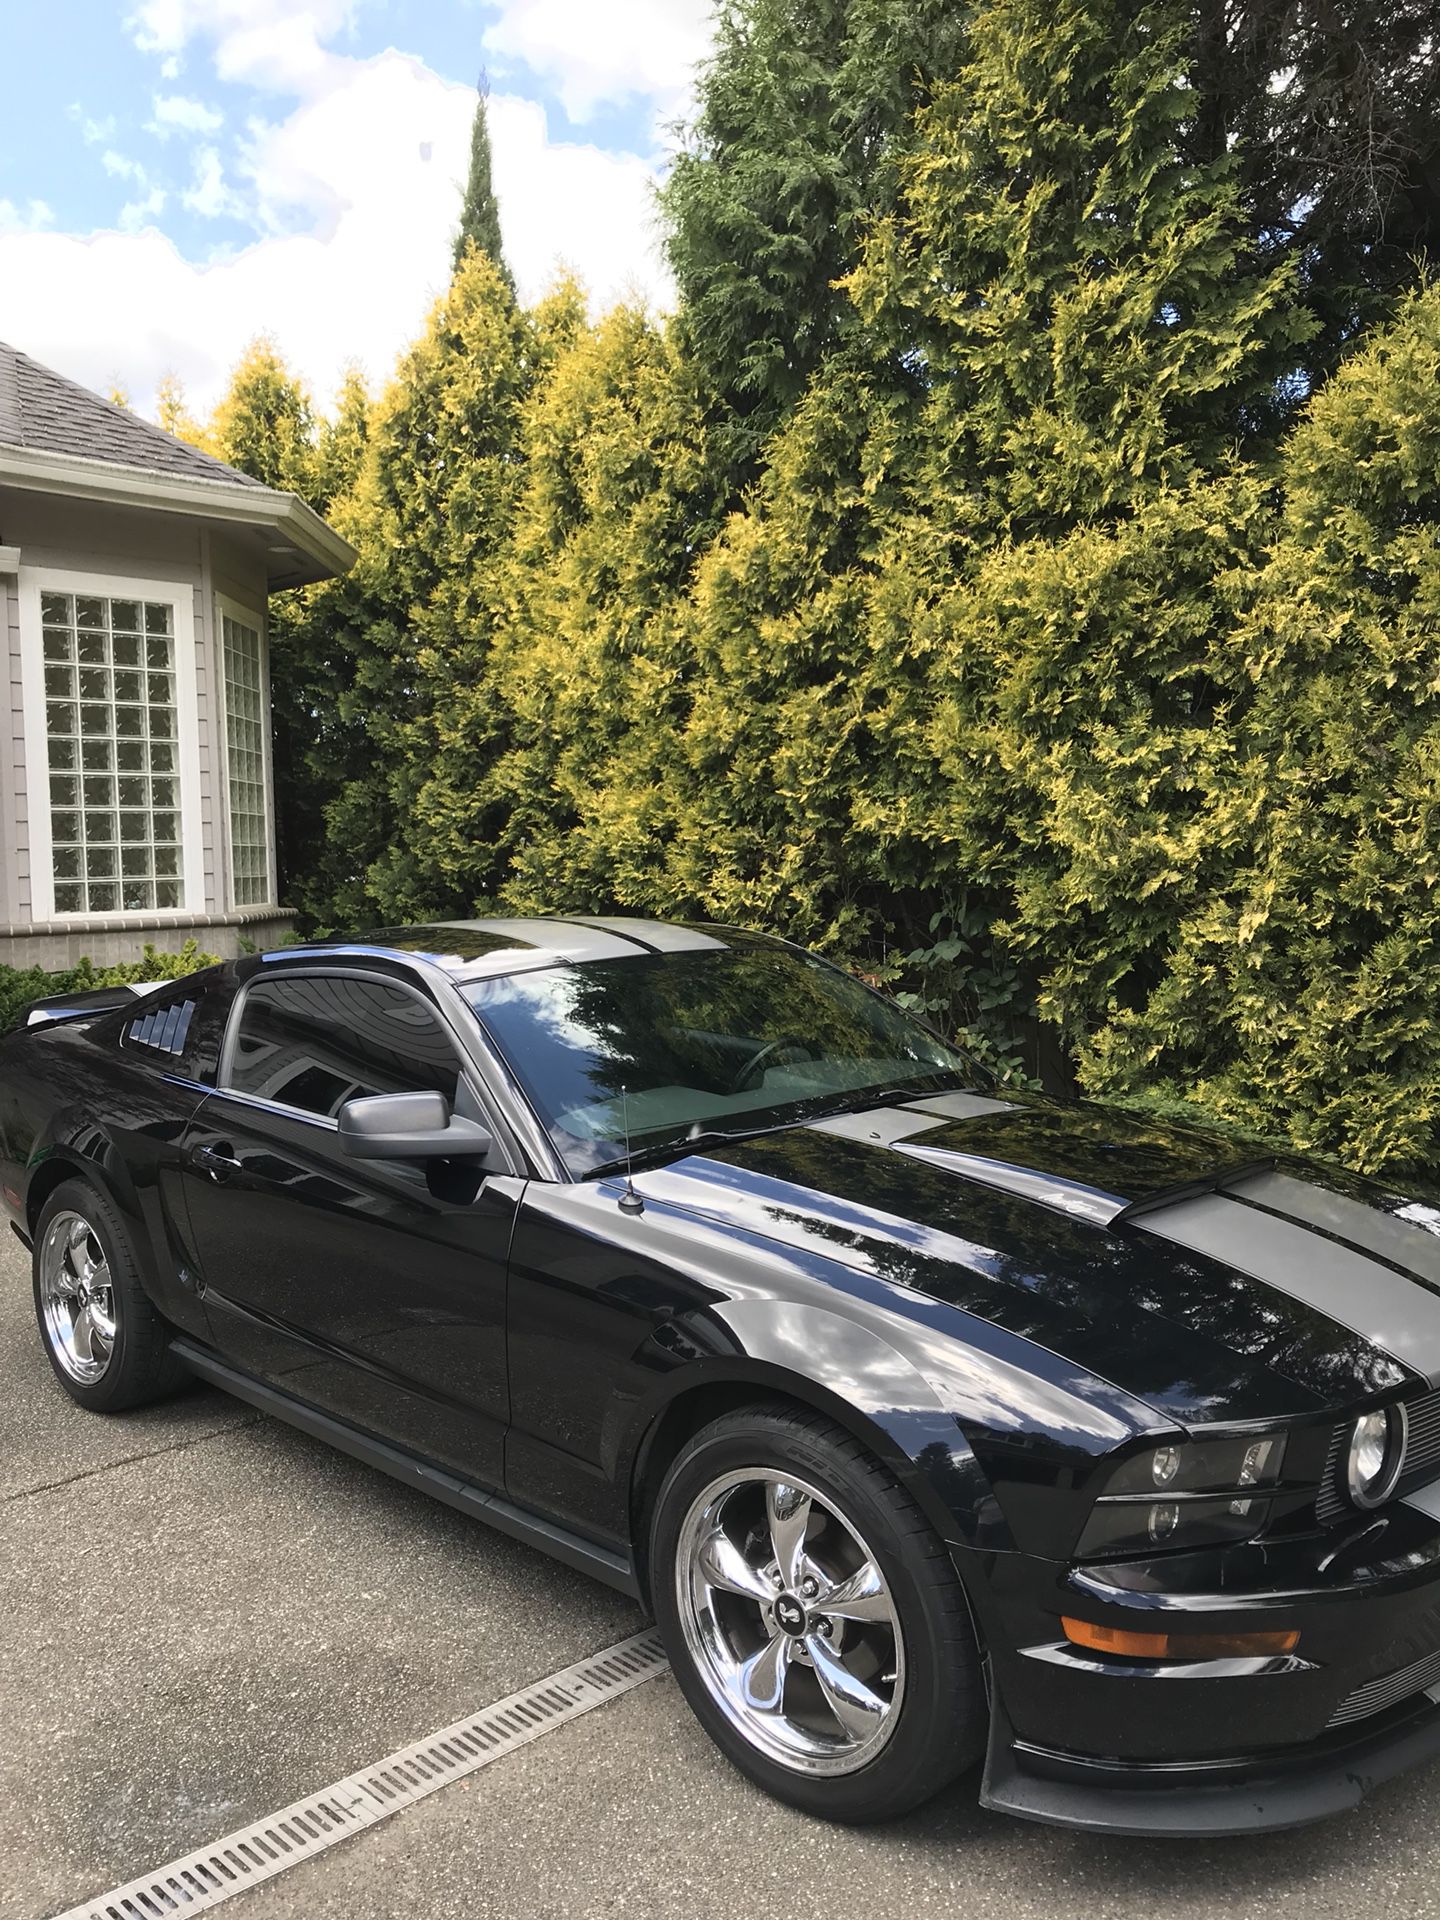 ‘05 Shelby Style Ford Mustang, Gorgeous, Low Miles